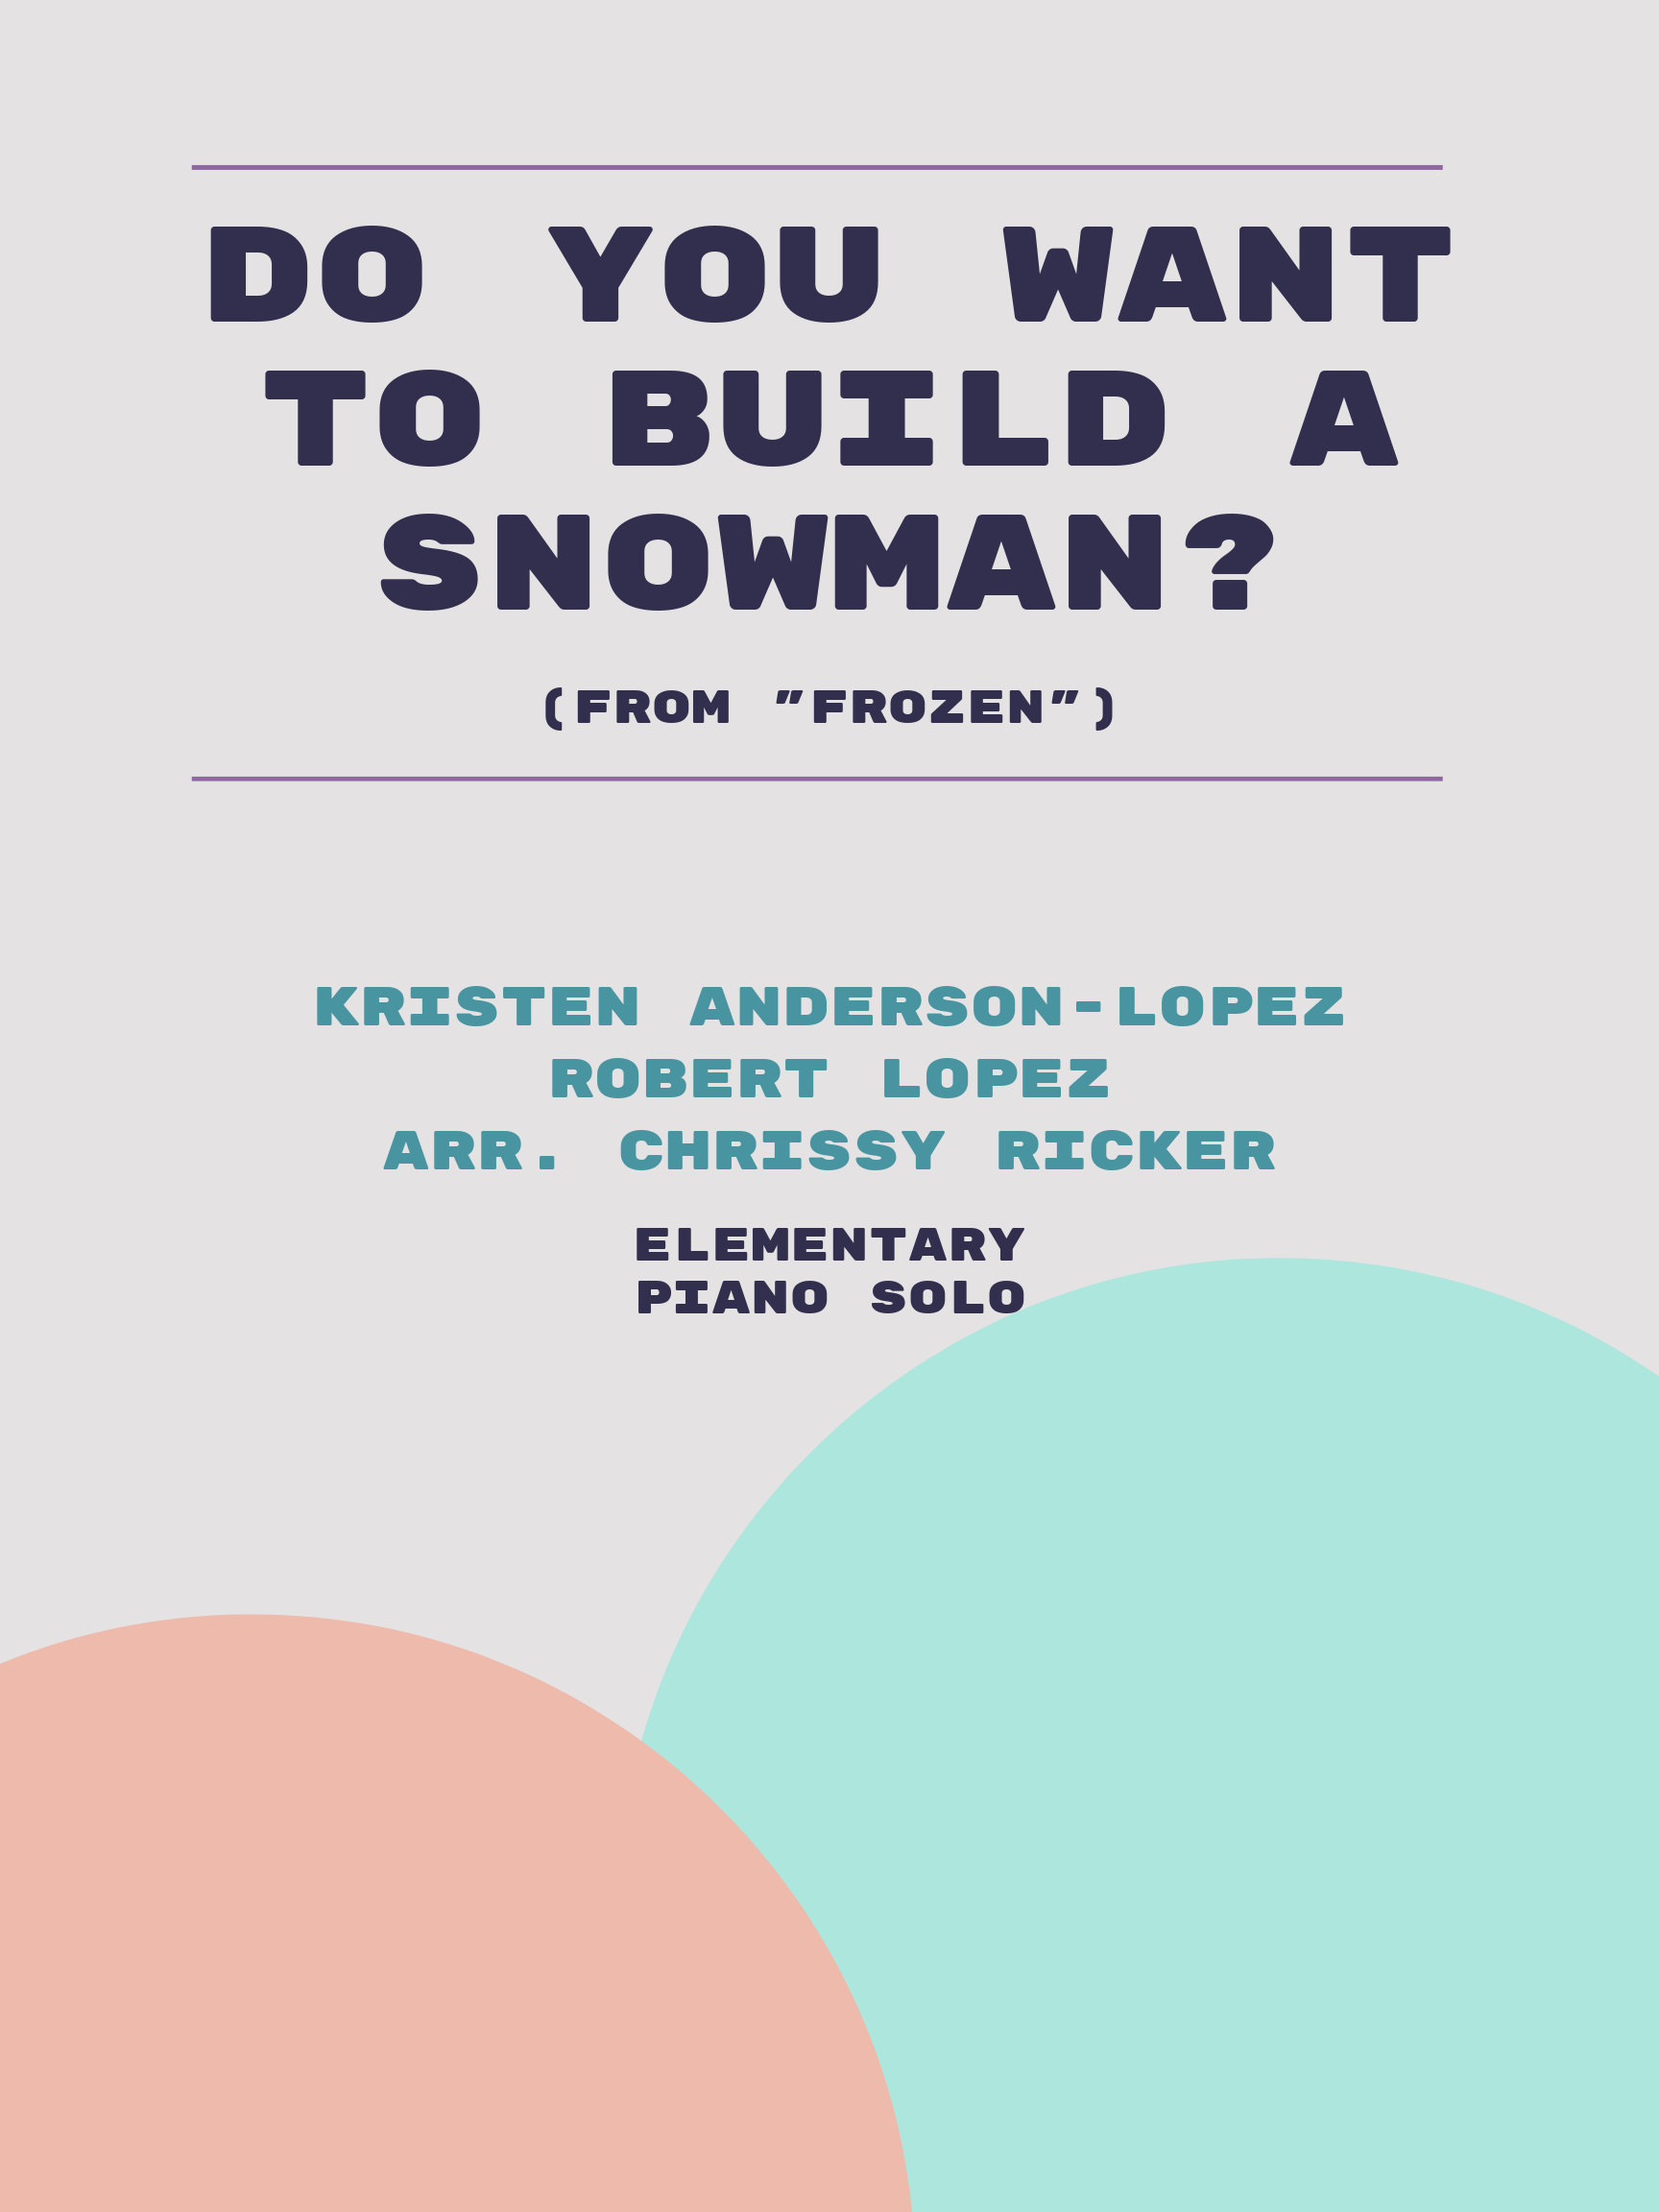 Do You Want to Build a Snowman? by Kristen Anderson-Lopez, Robert Lopez